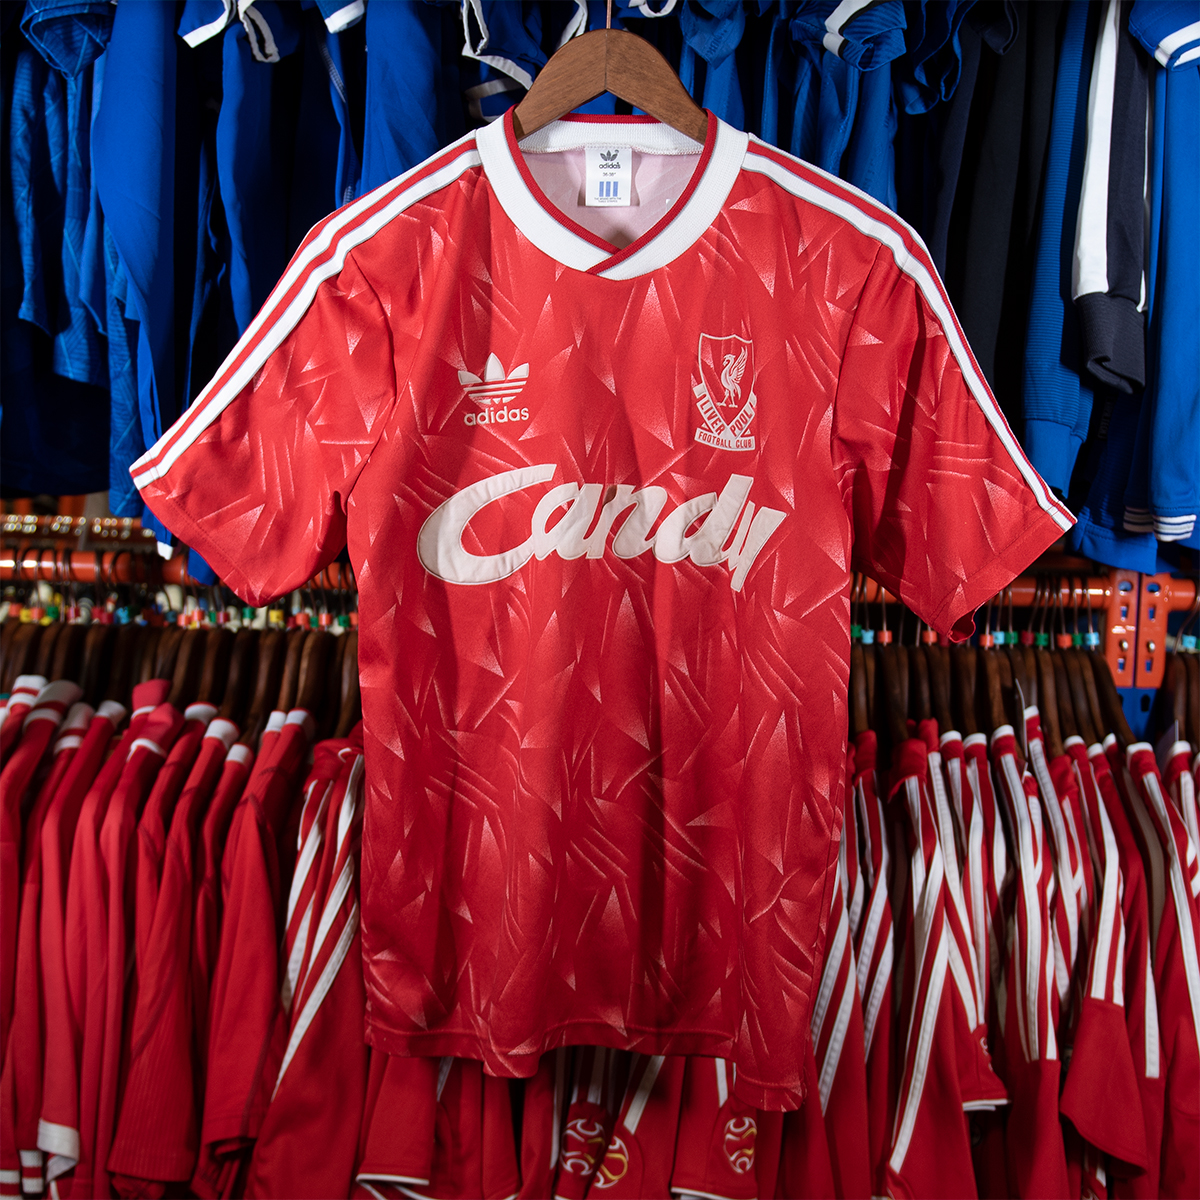 Inspired by PSG? Liverpool's - Classic Football Shirts